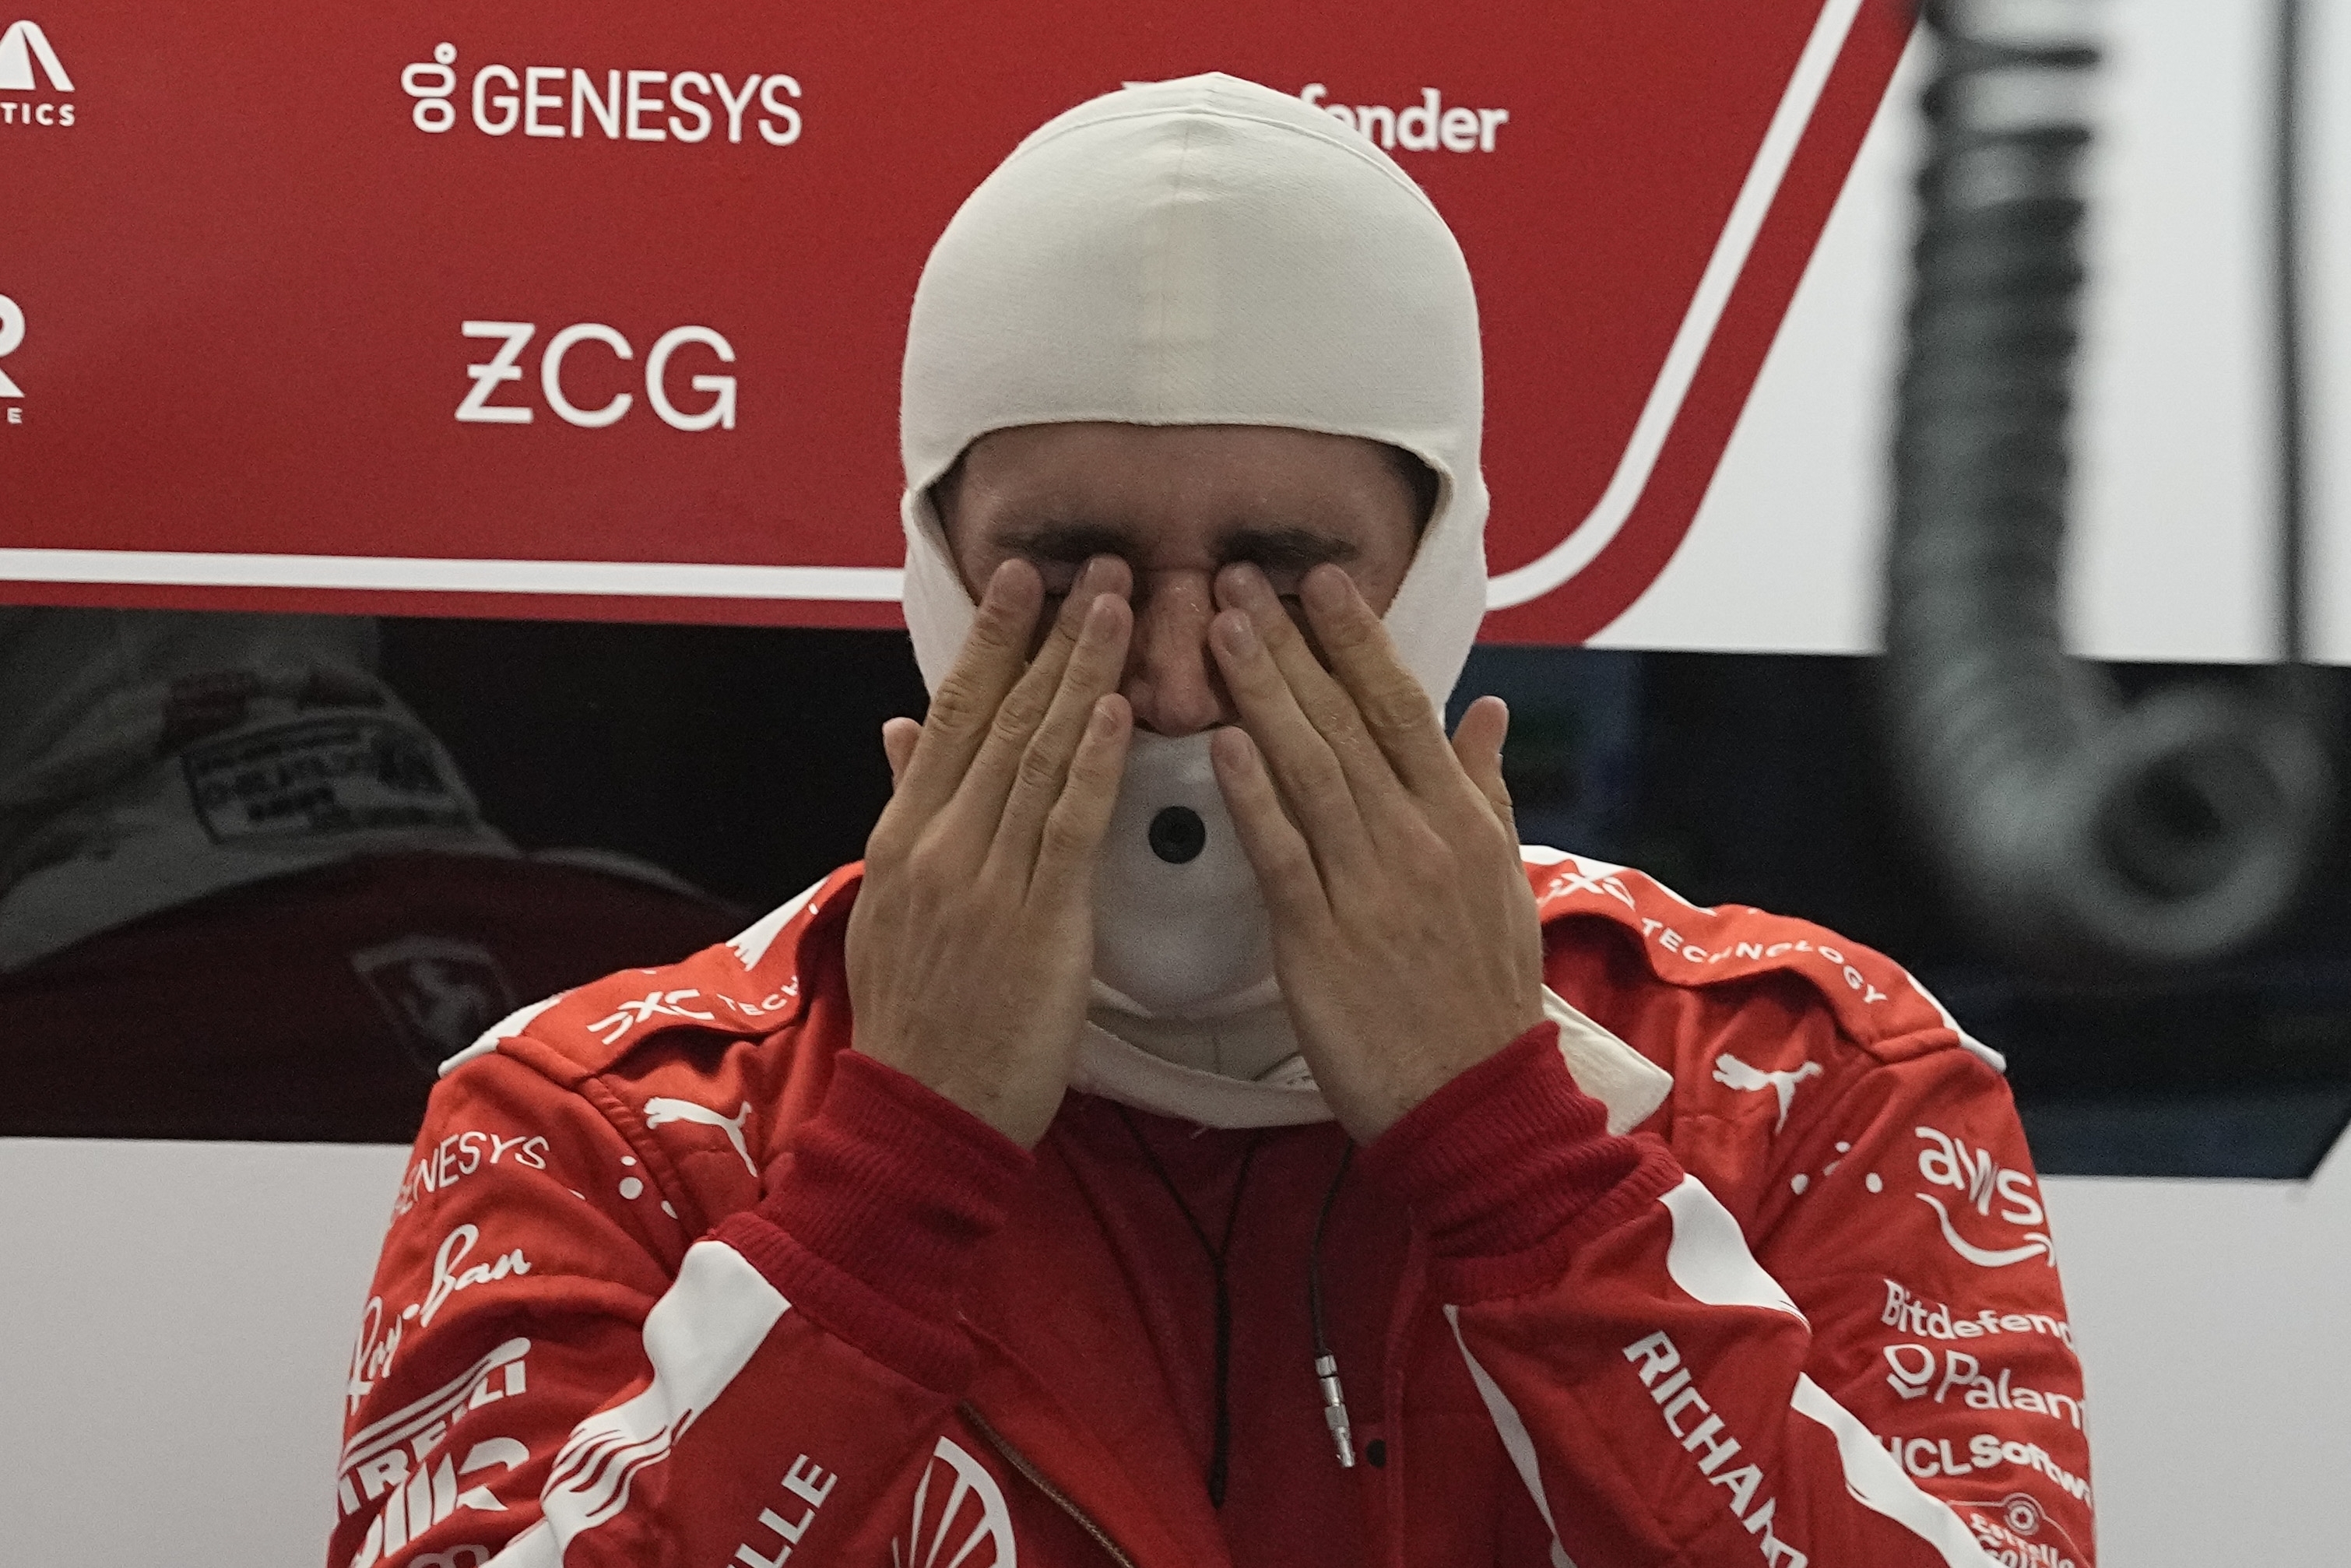 Ferrari driver Charles Leclerc rubs his eyes before the start of the second practice session